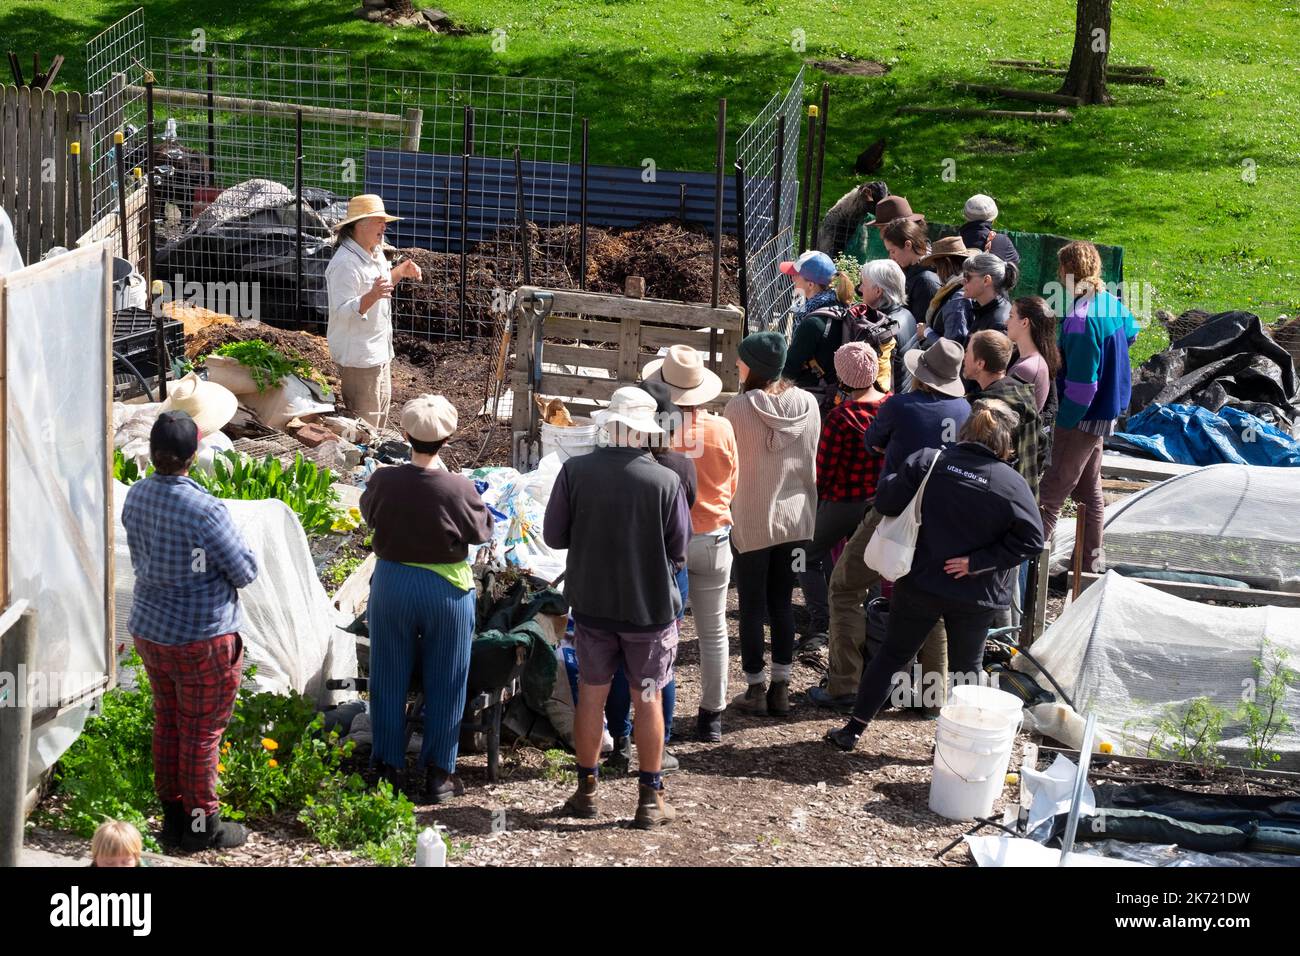 A group of permaculture students attending a composting workshop on a small urban farm in the suburbs of Hobart, Tasmania Stock Photo